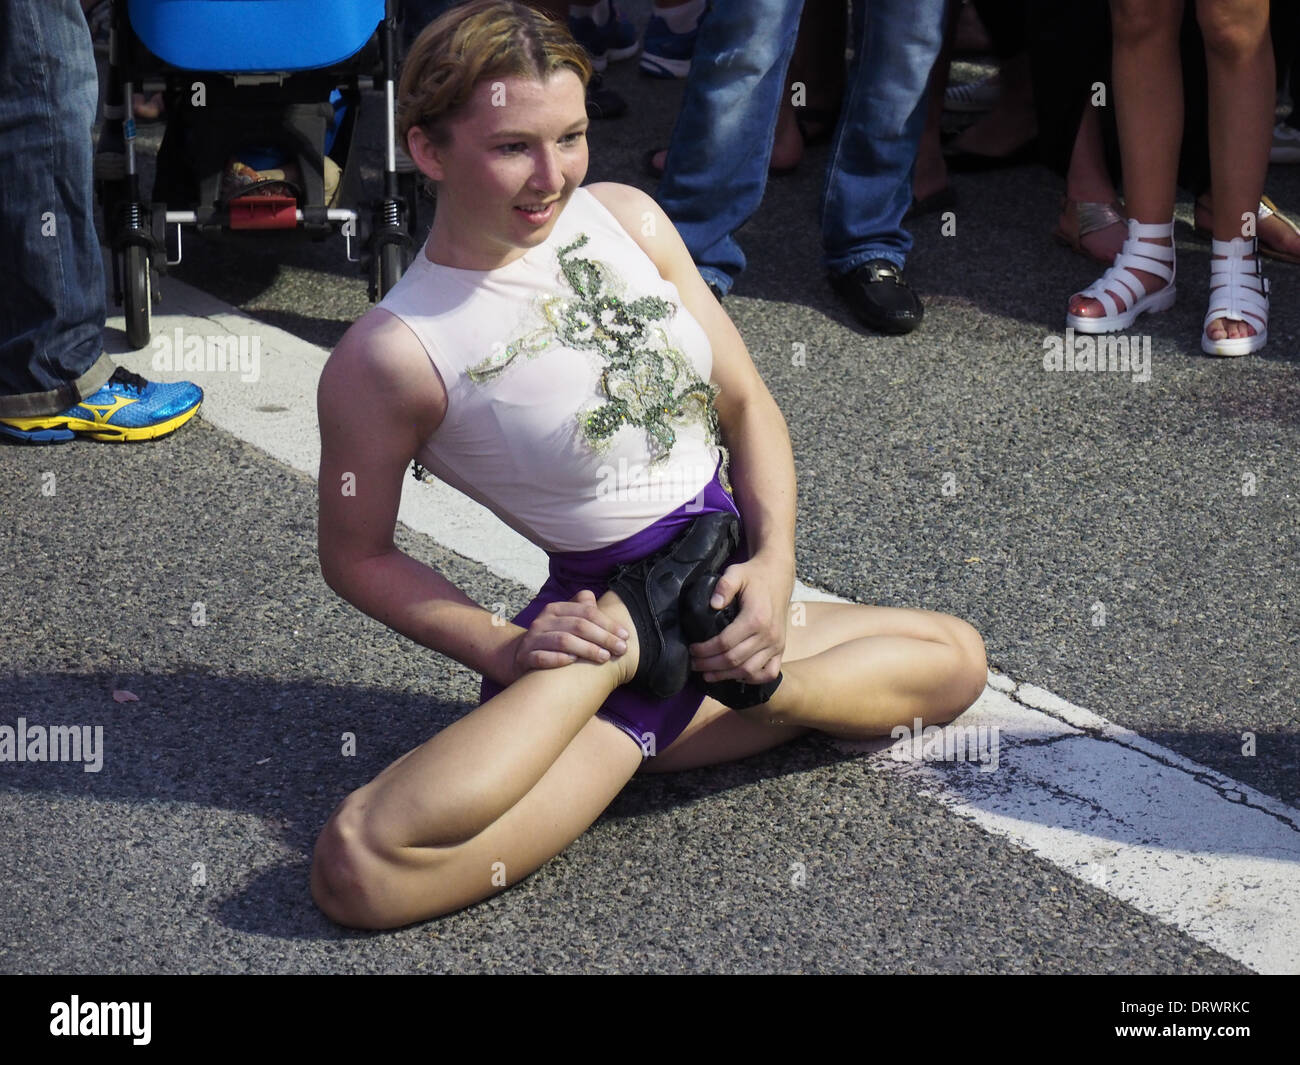 Young lady  gymnast doing splits and double jointed at Beaufort Street Festival Mount Lawley Perth Western Australia 2013, Stock Photo